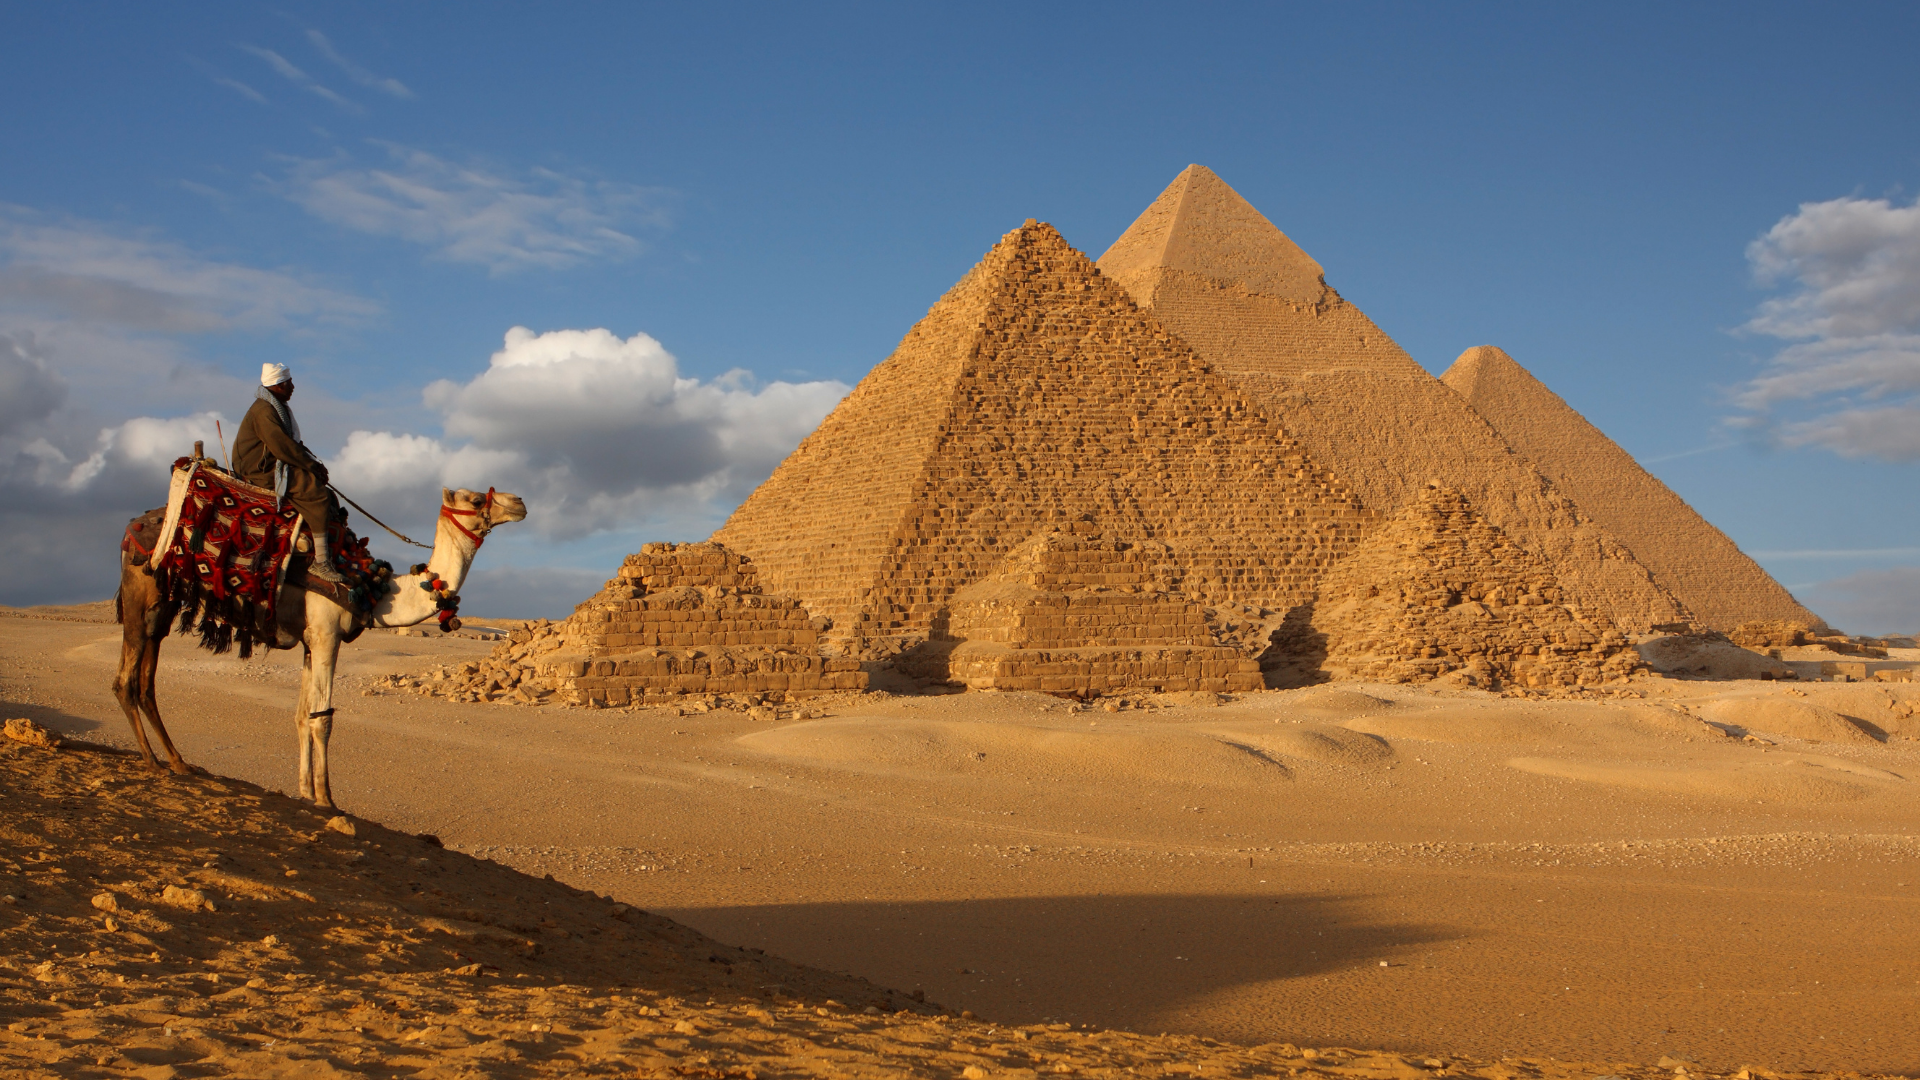 There is more to Egypt than just the Pyramids